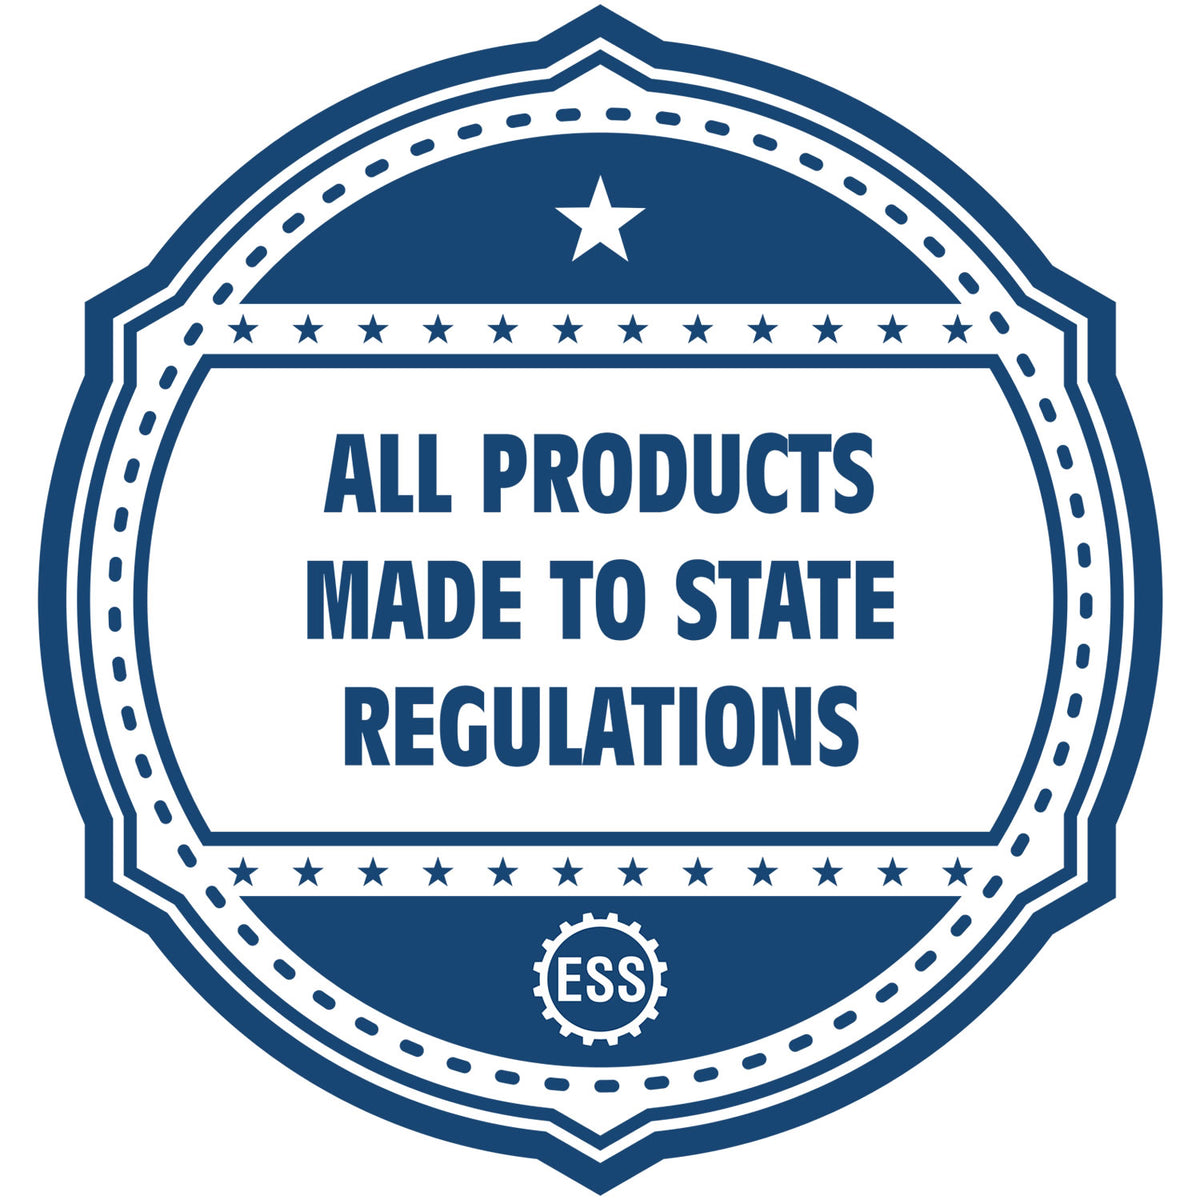 An icon or badge element for the Wooden Handle Kentucky State Seal Notary Public Stamp showing that this product is made in compliance with state regulations.